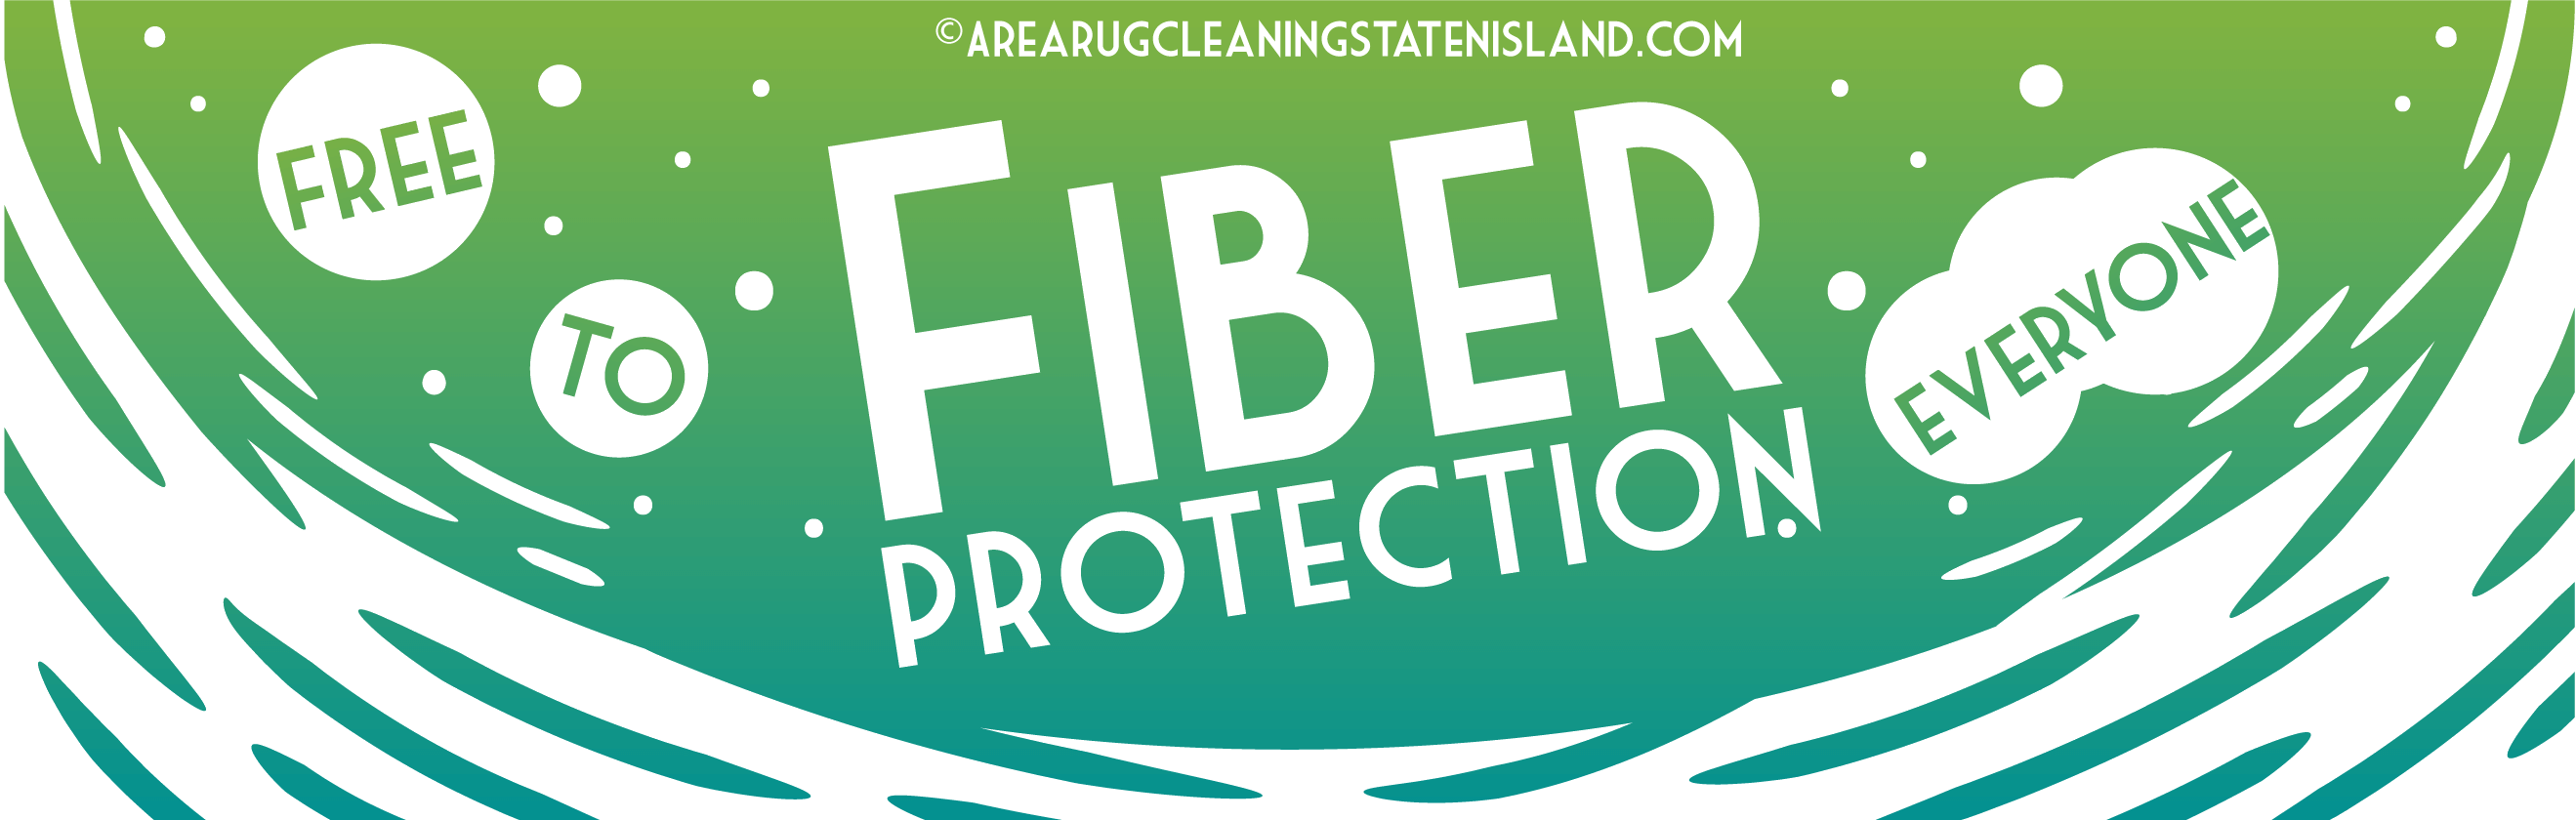 Free Fiber Protection for All Cleaning - Staten-island